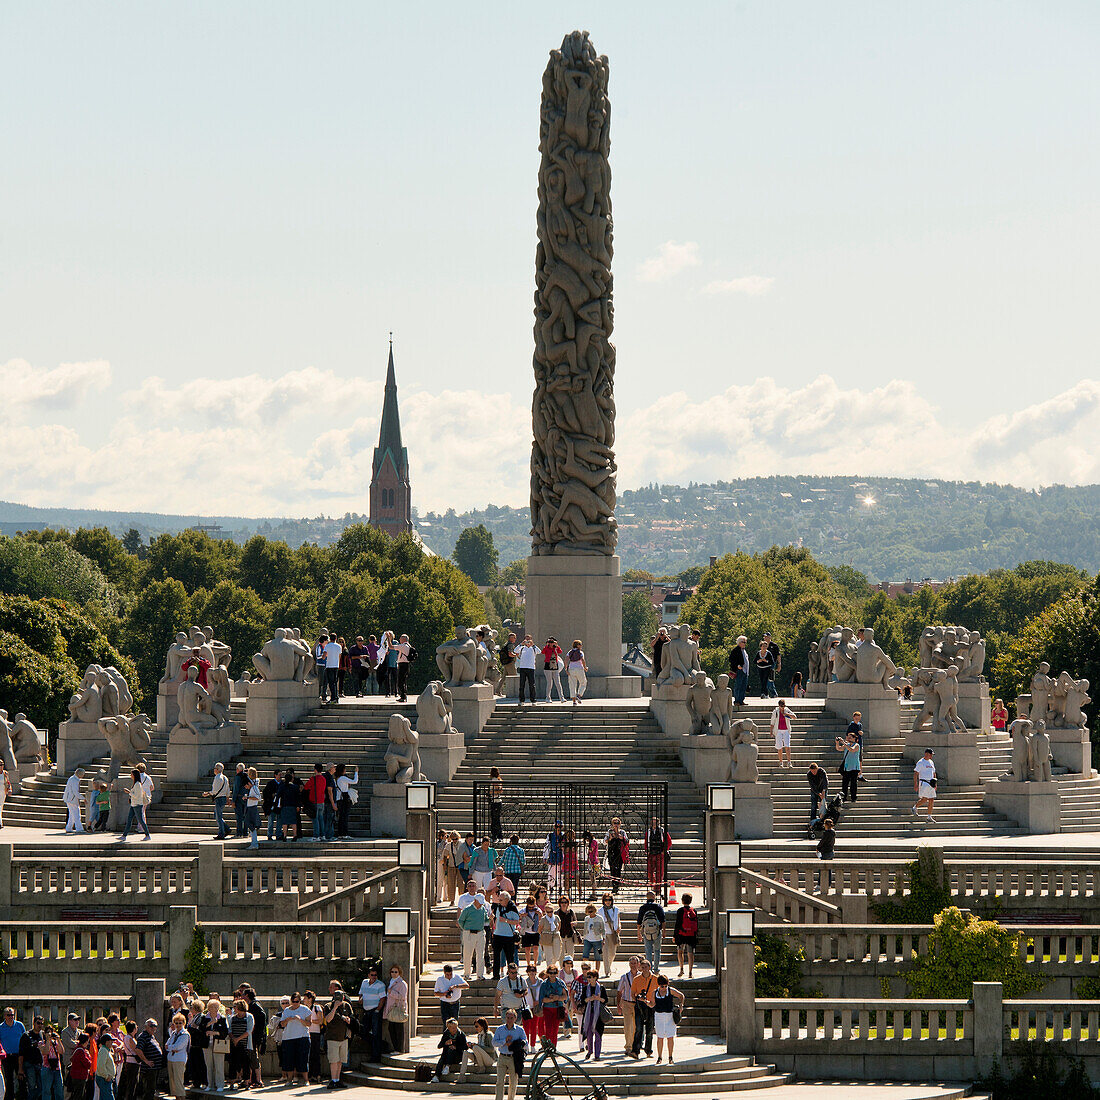 Crowd And The Monolith At Frogner Park Vigeland Sculpture Park; Oslo Norway